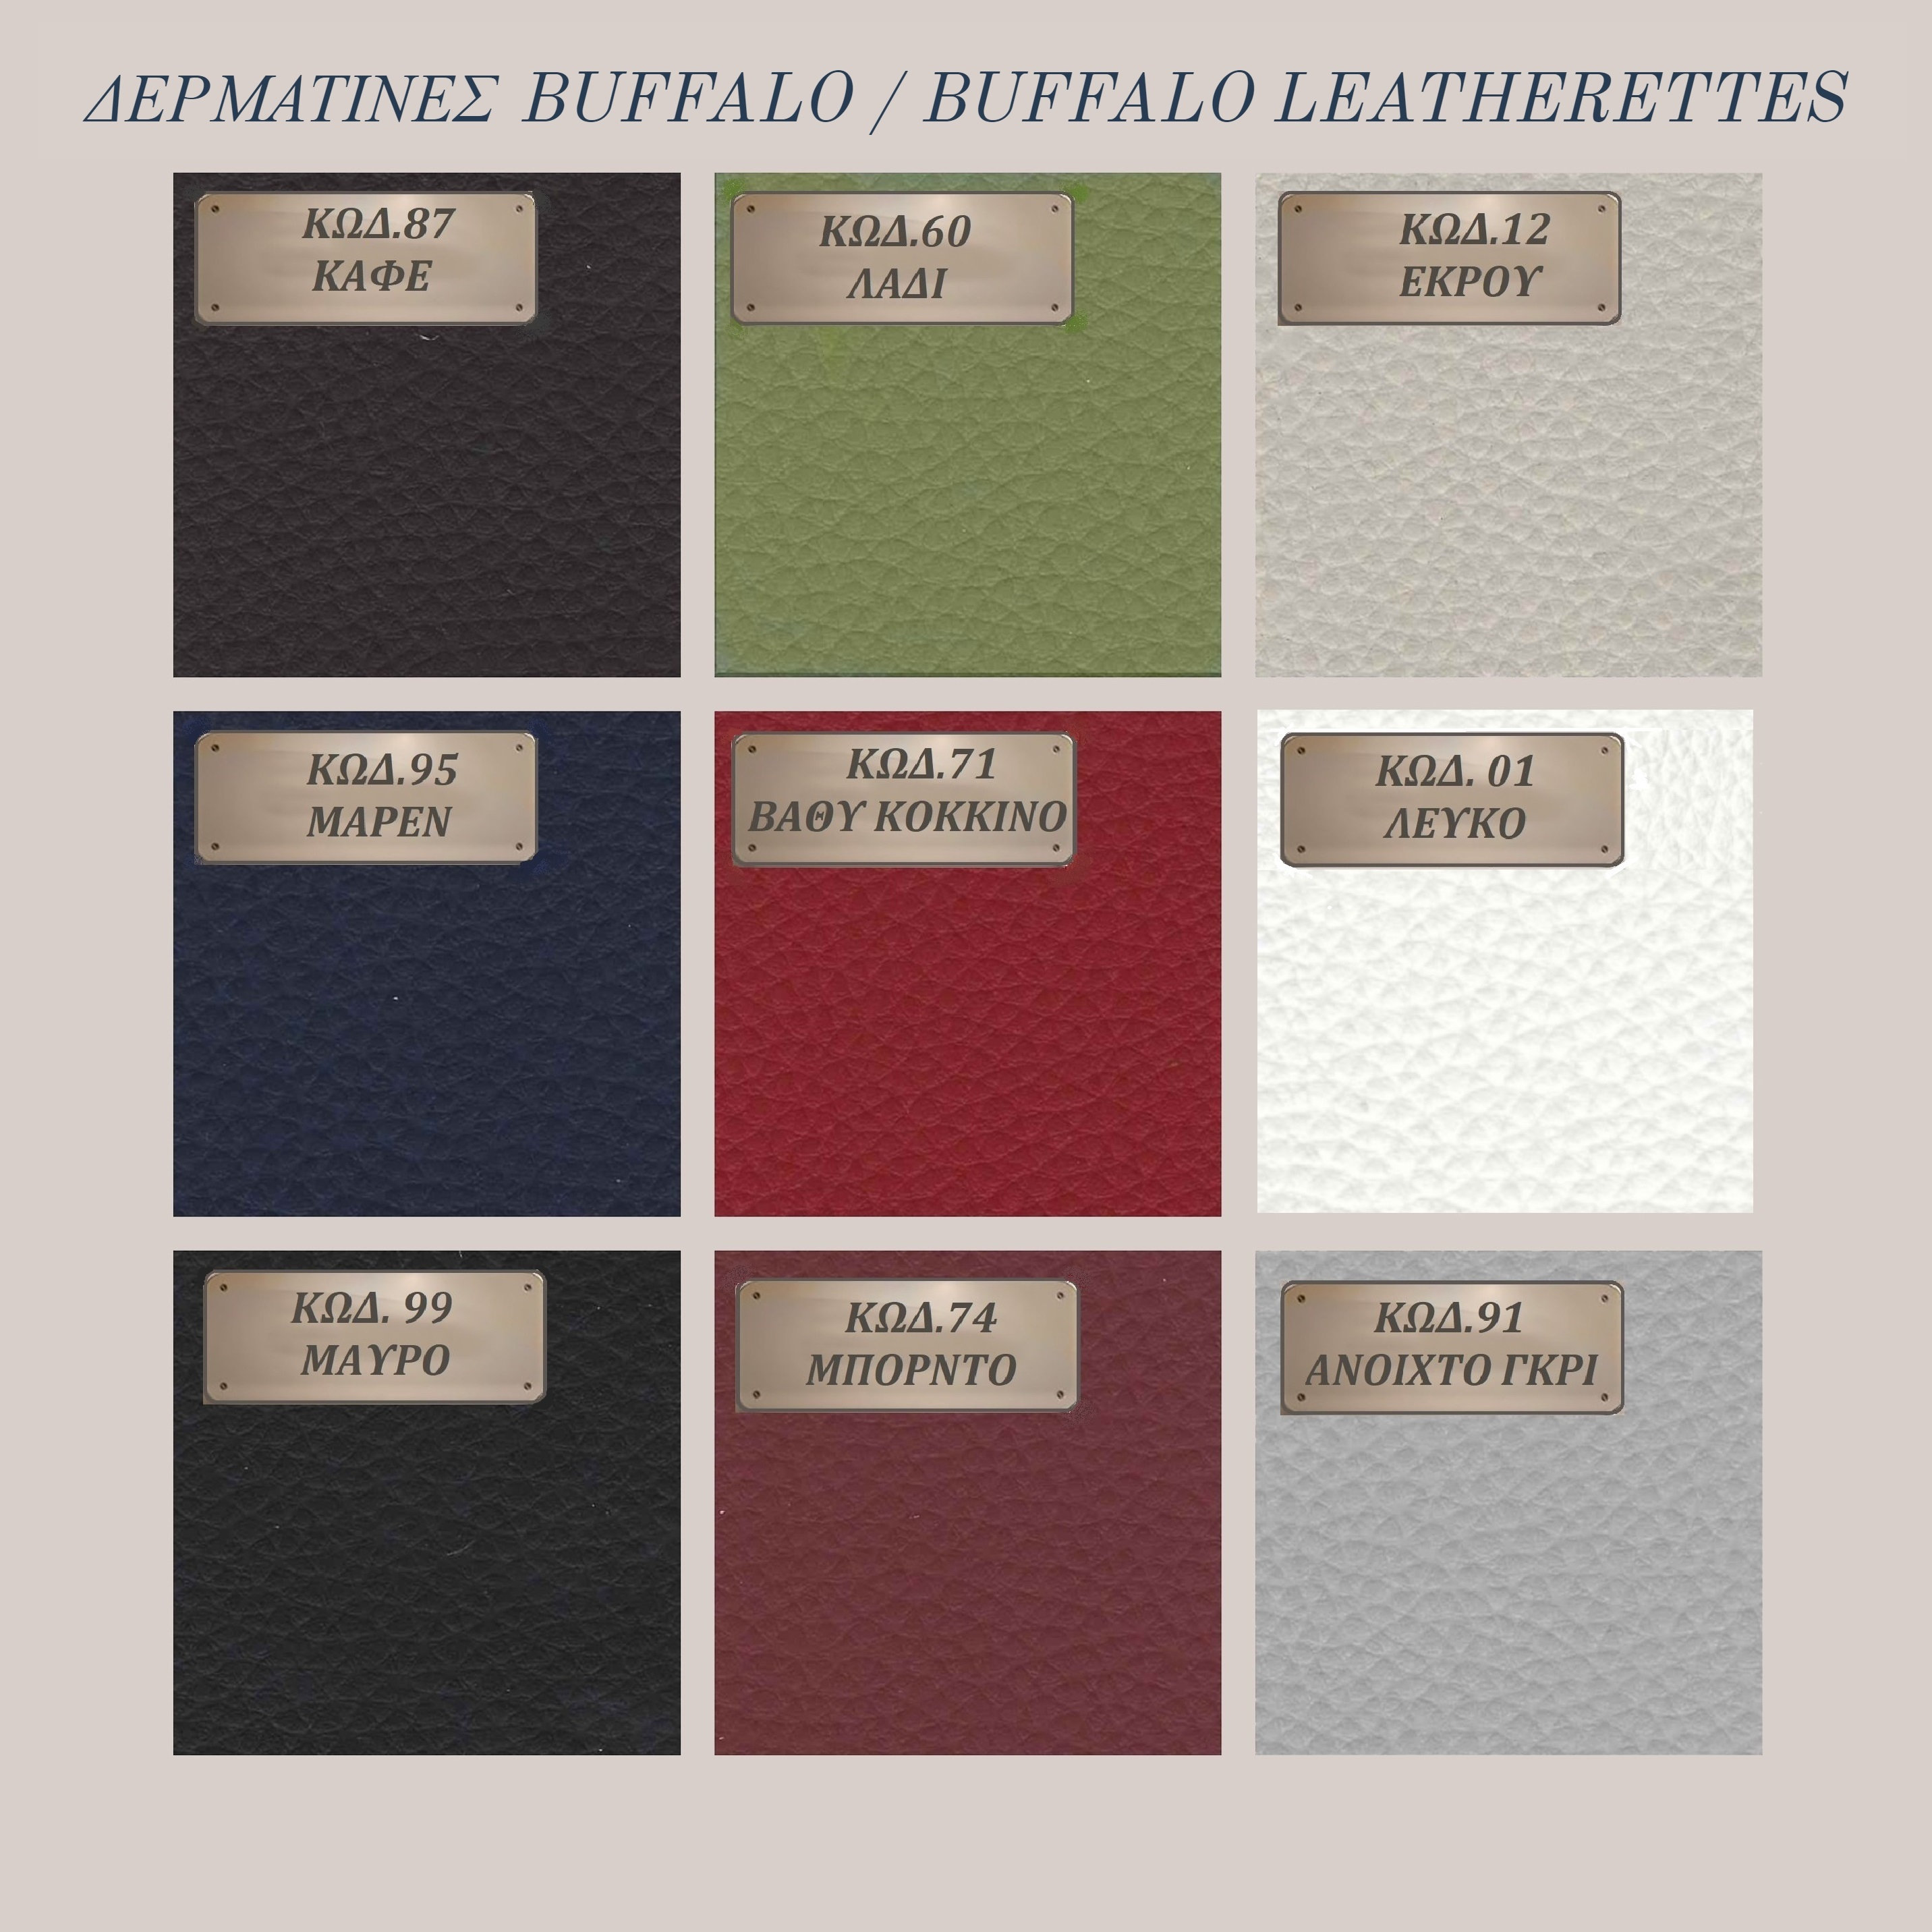 images/Items/Materials/04.BUFFALO LEATHERETTES.jpg